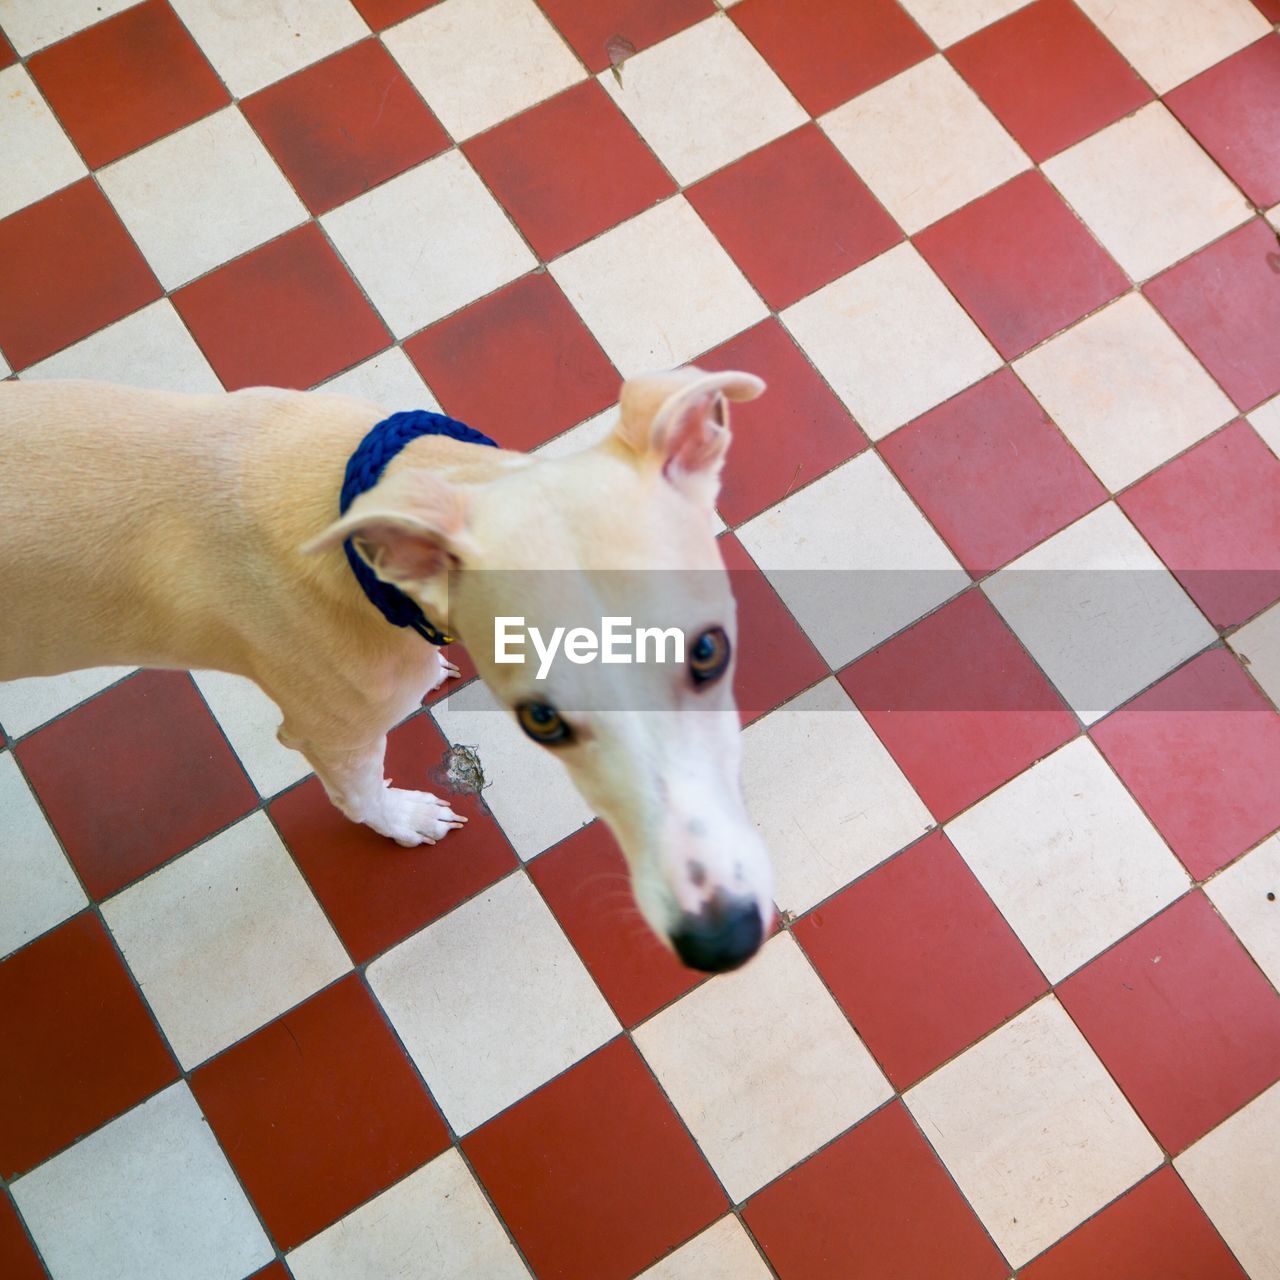 HIGH ANGLE VIEW OF WHITE DOG ON FLOOR